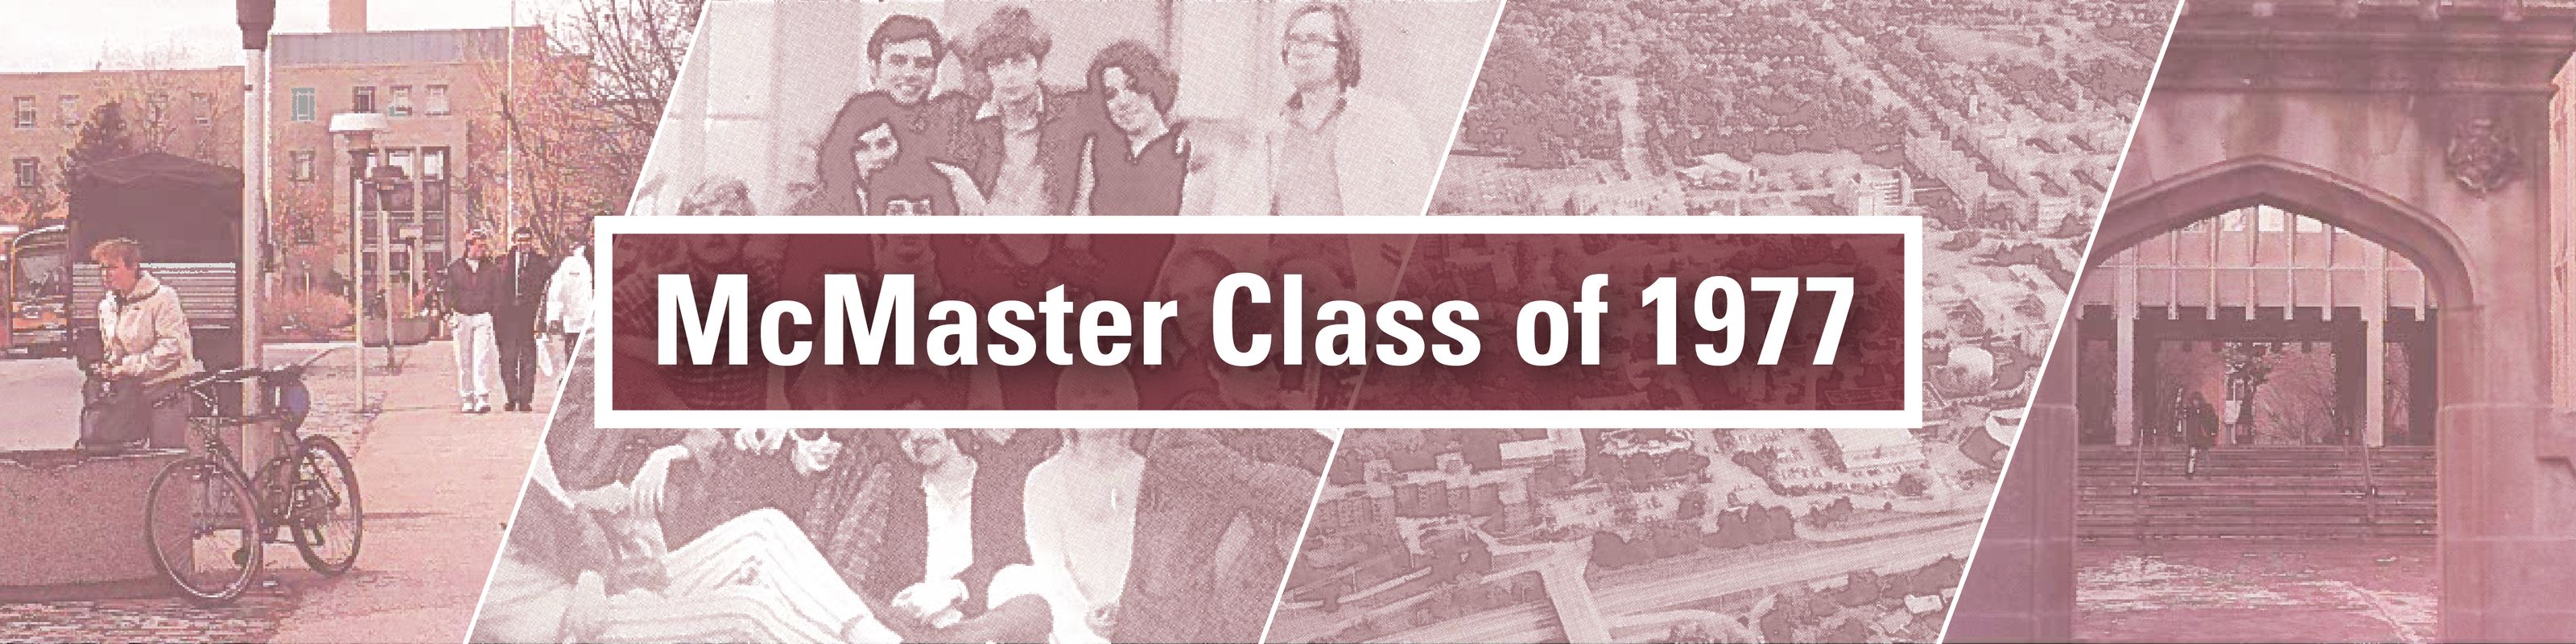 McMaster Class of 1977